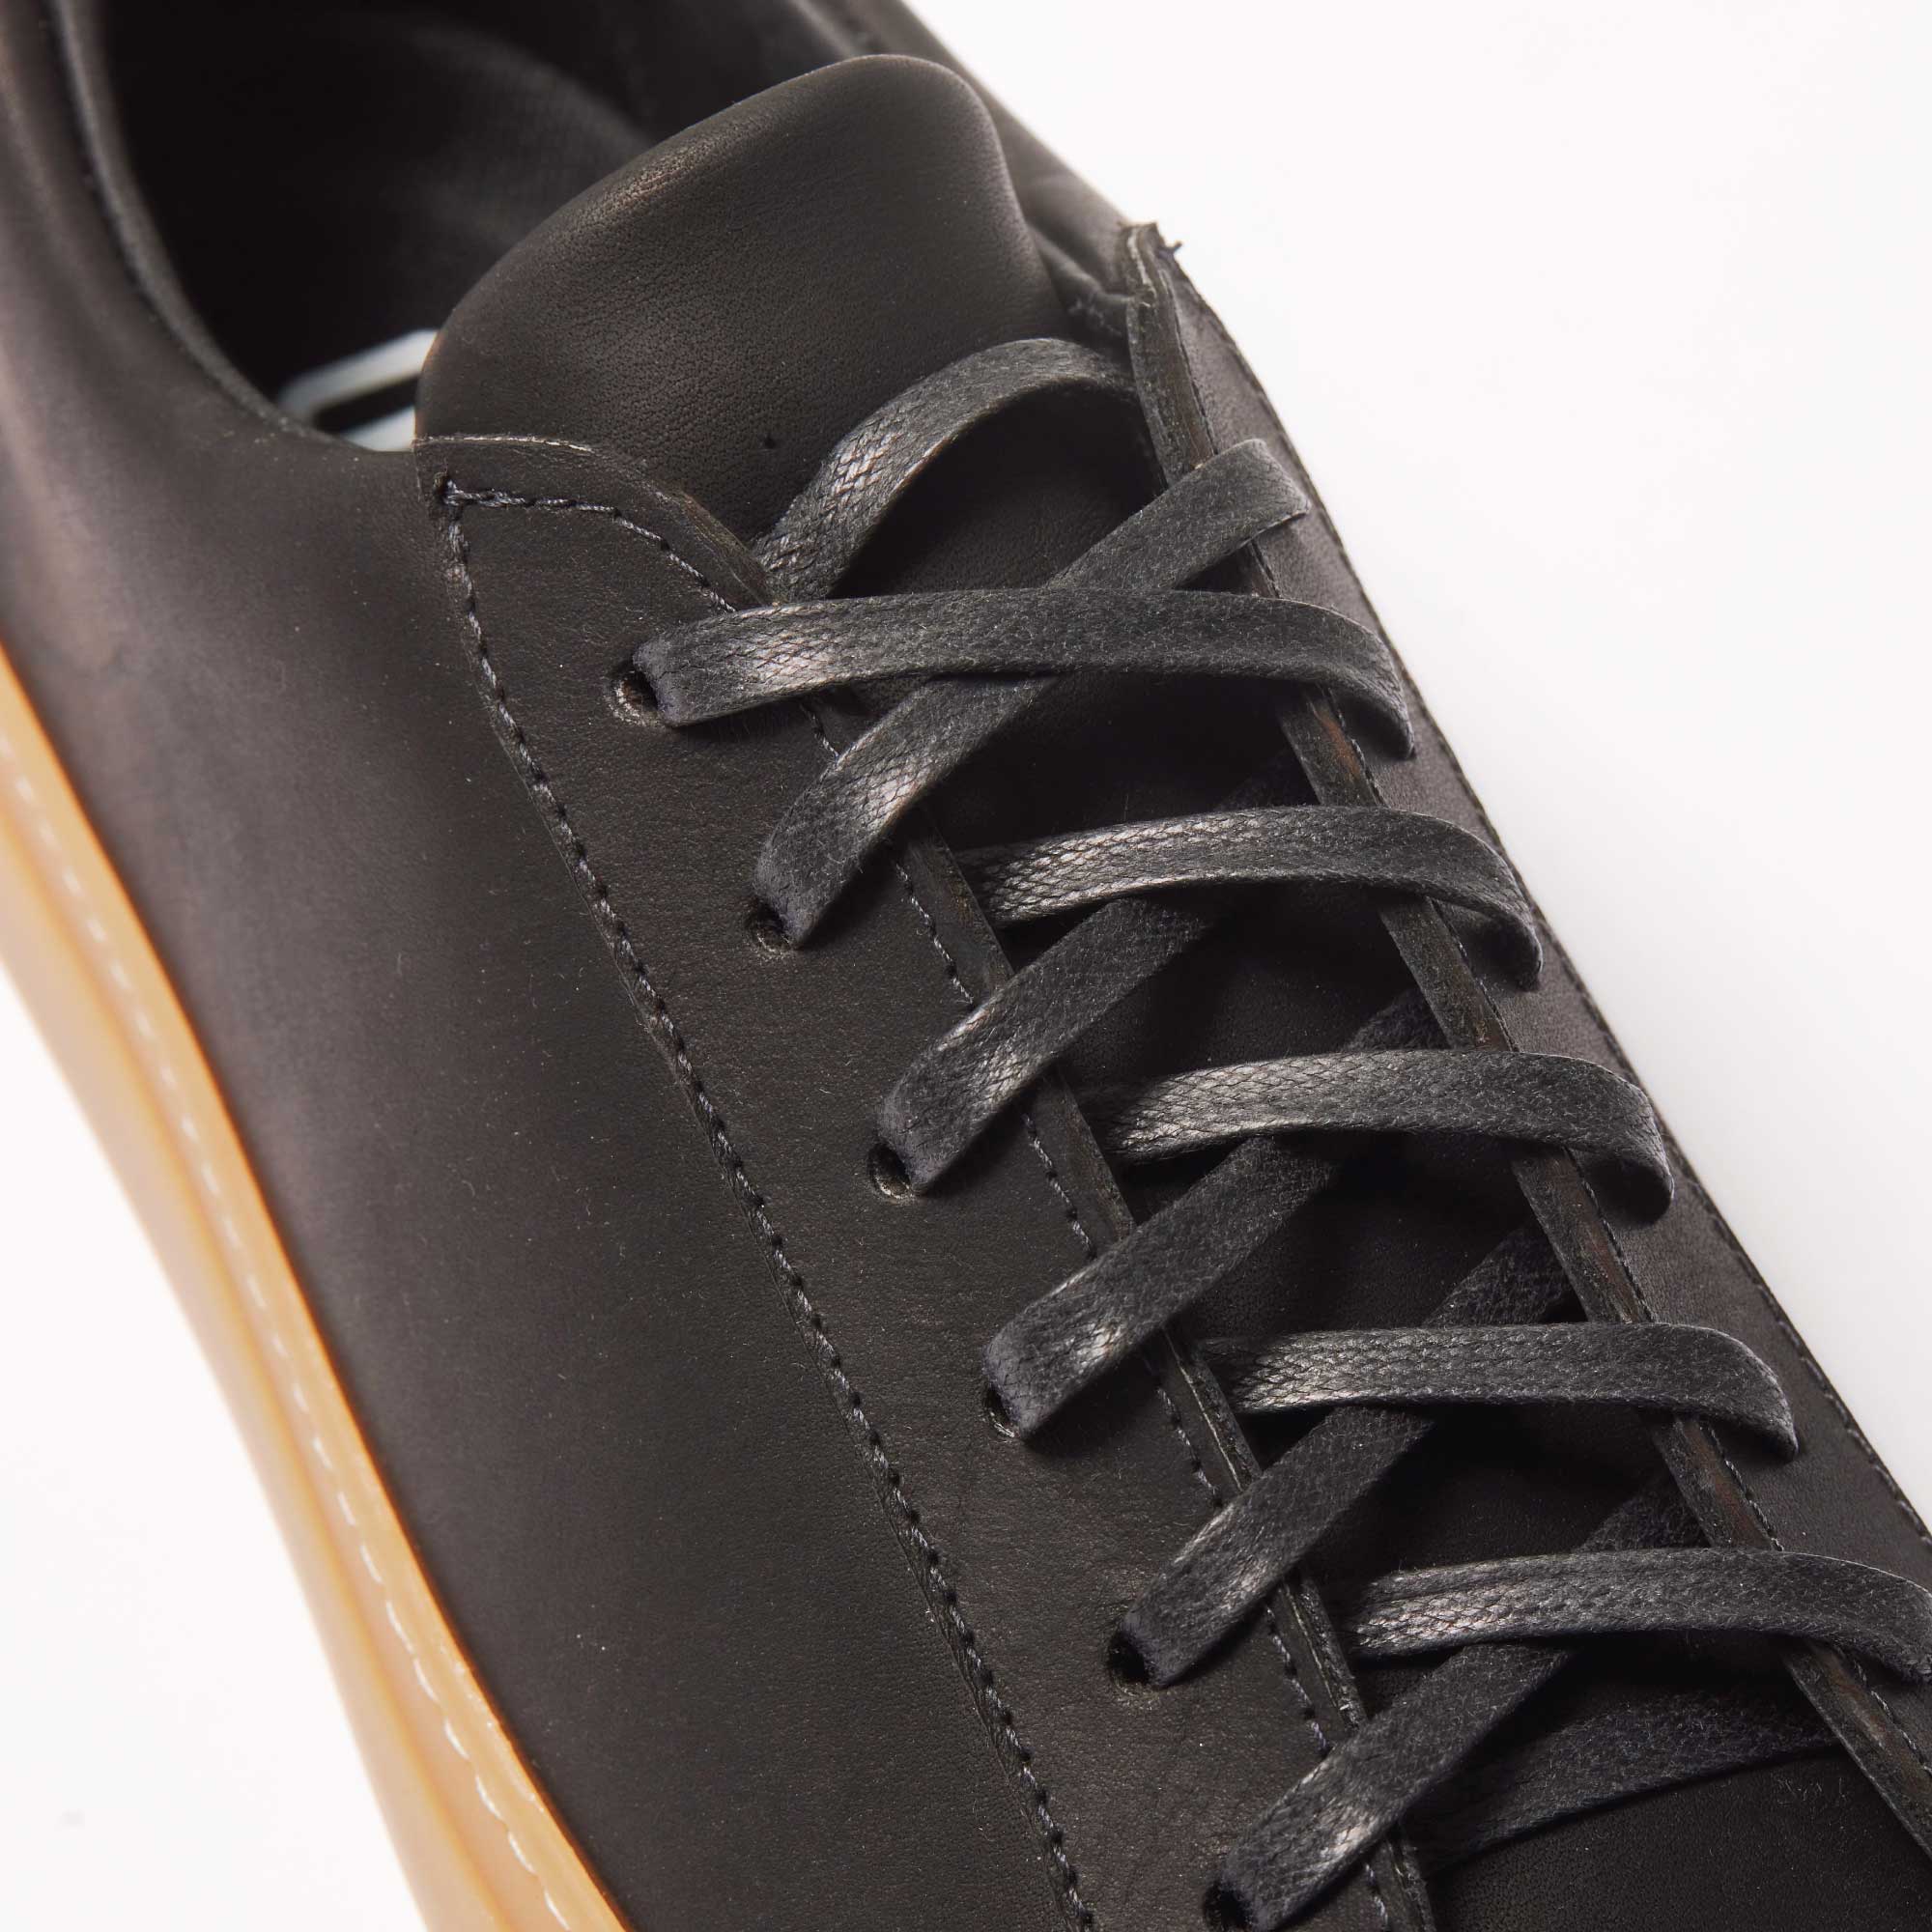 Pre-Order Women's James Court Lo | Horween Black and Gum